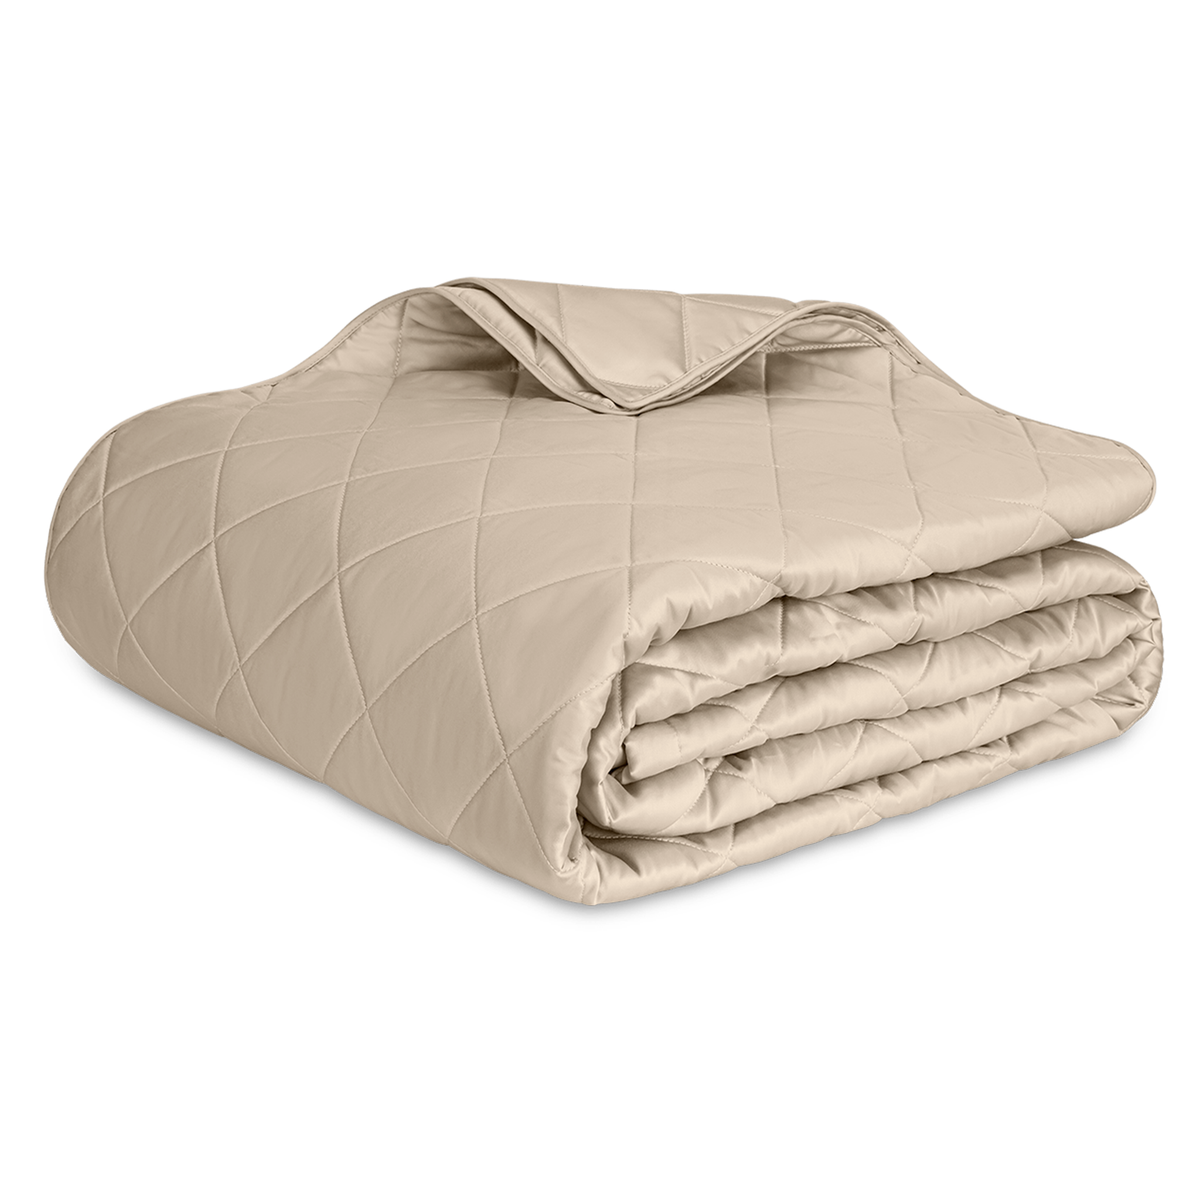 Silo Image of Matouk Nocturne Quilted Bedding Quilt in Khaki